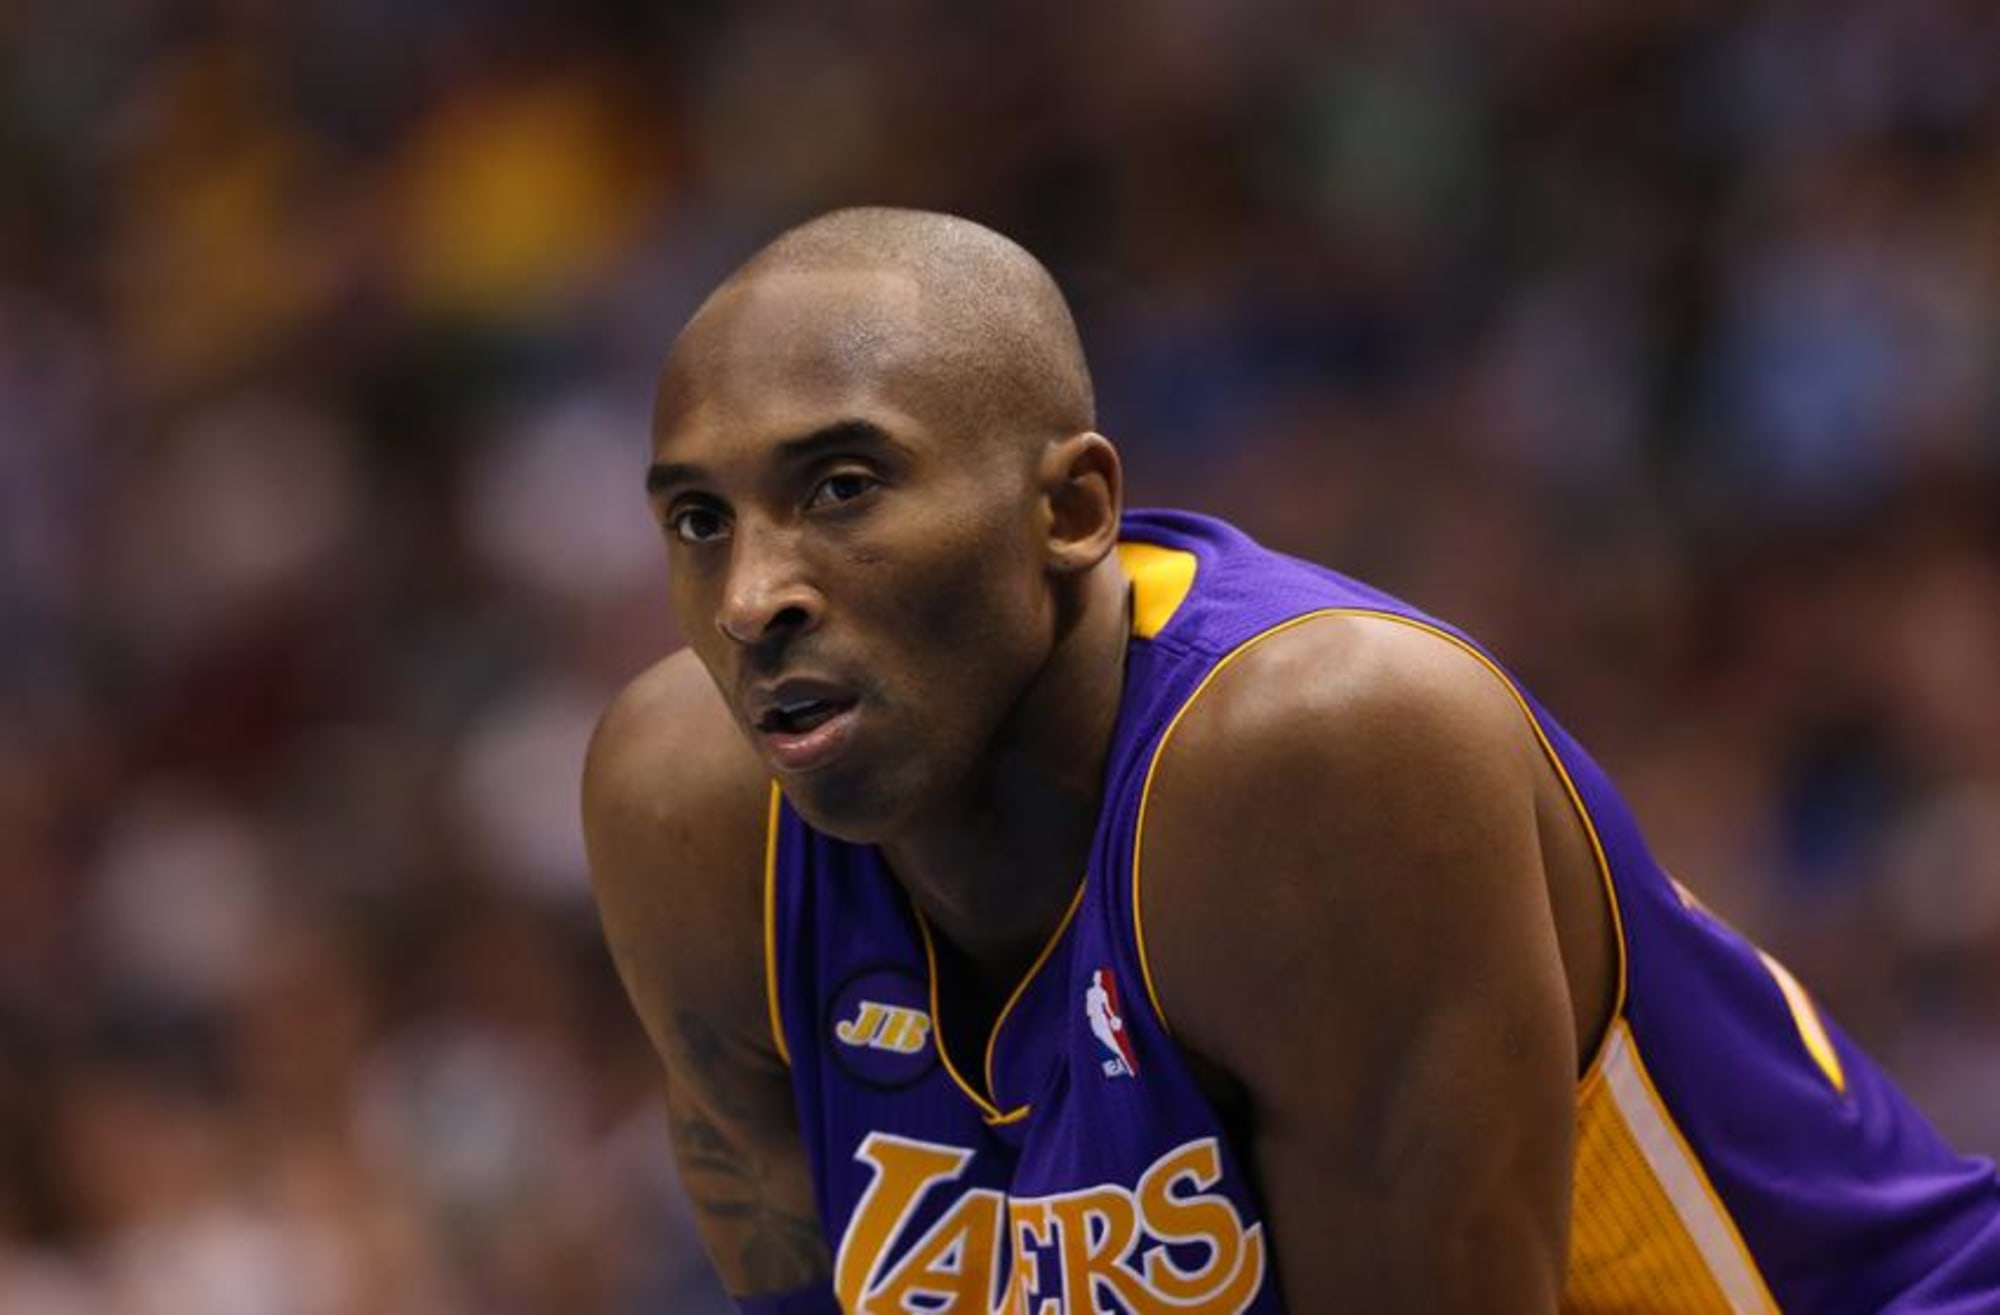 Kobe Bryant dunks in game for first time since Achilles injury during Lakers-Suns  (Video)